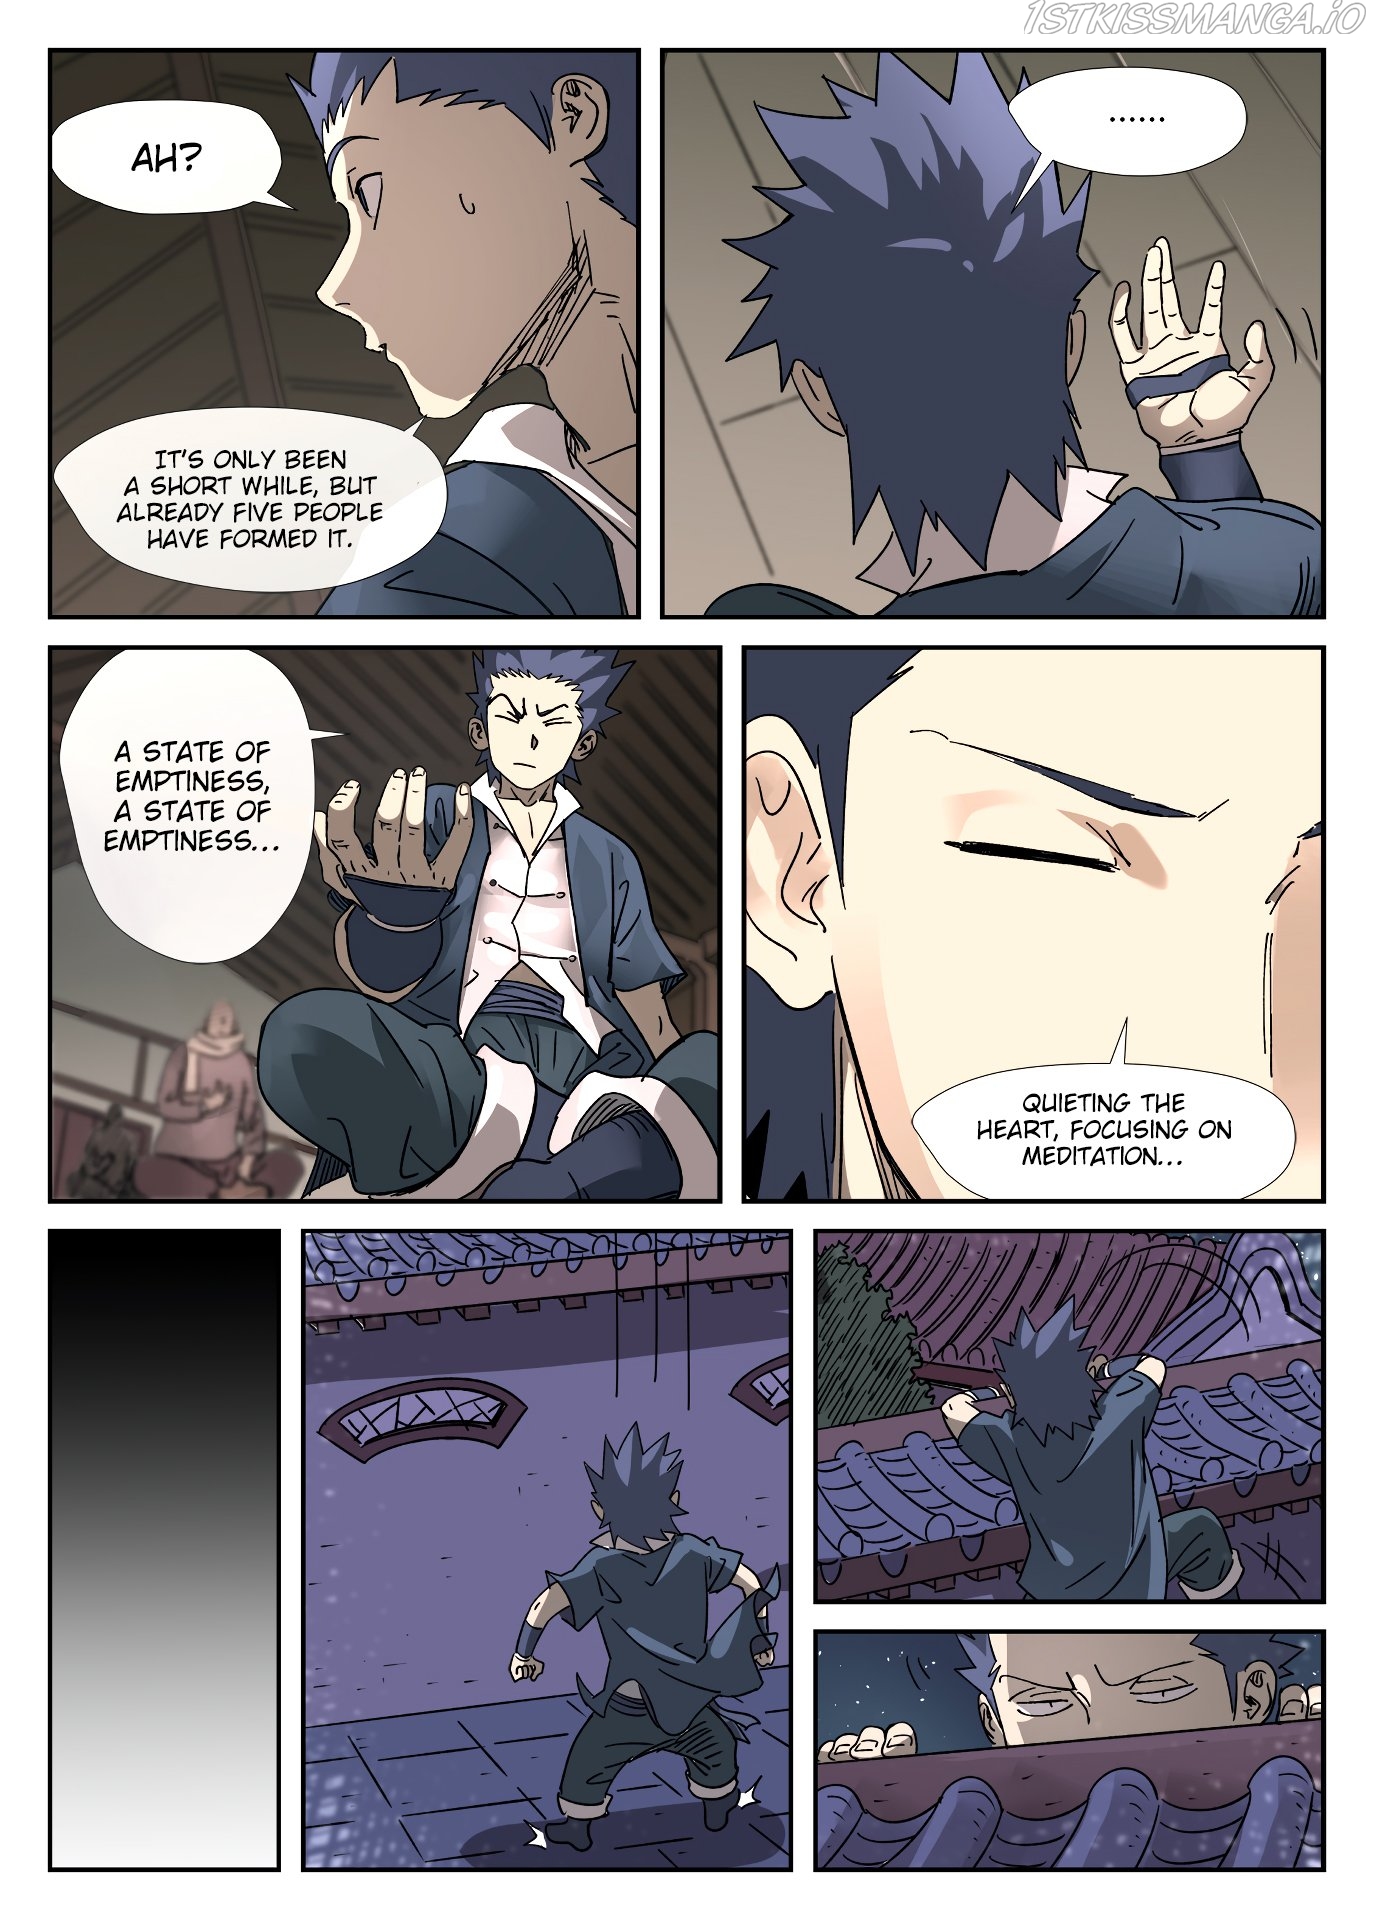 Tales of Demons and Gods Manhua Chapter 305.5 - Page 3